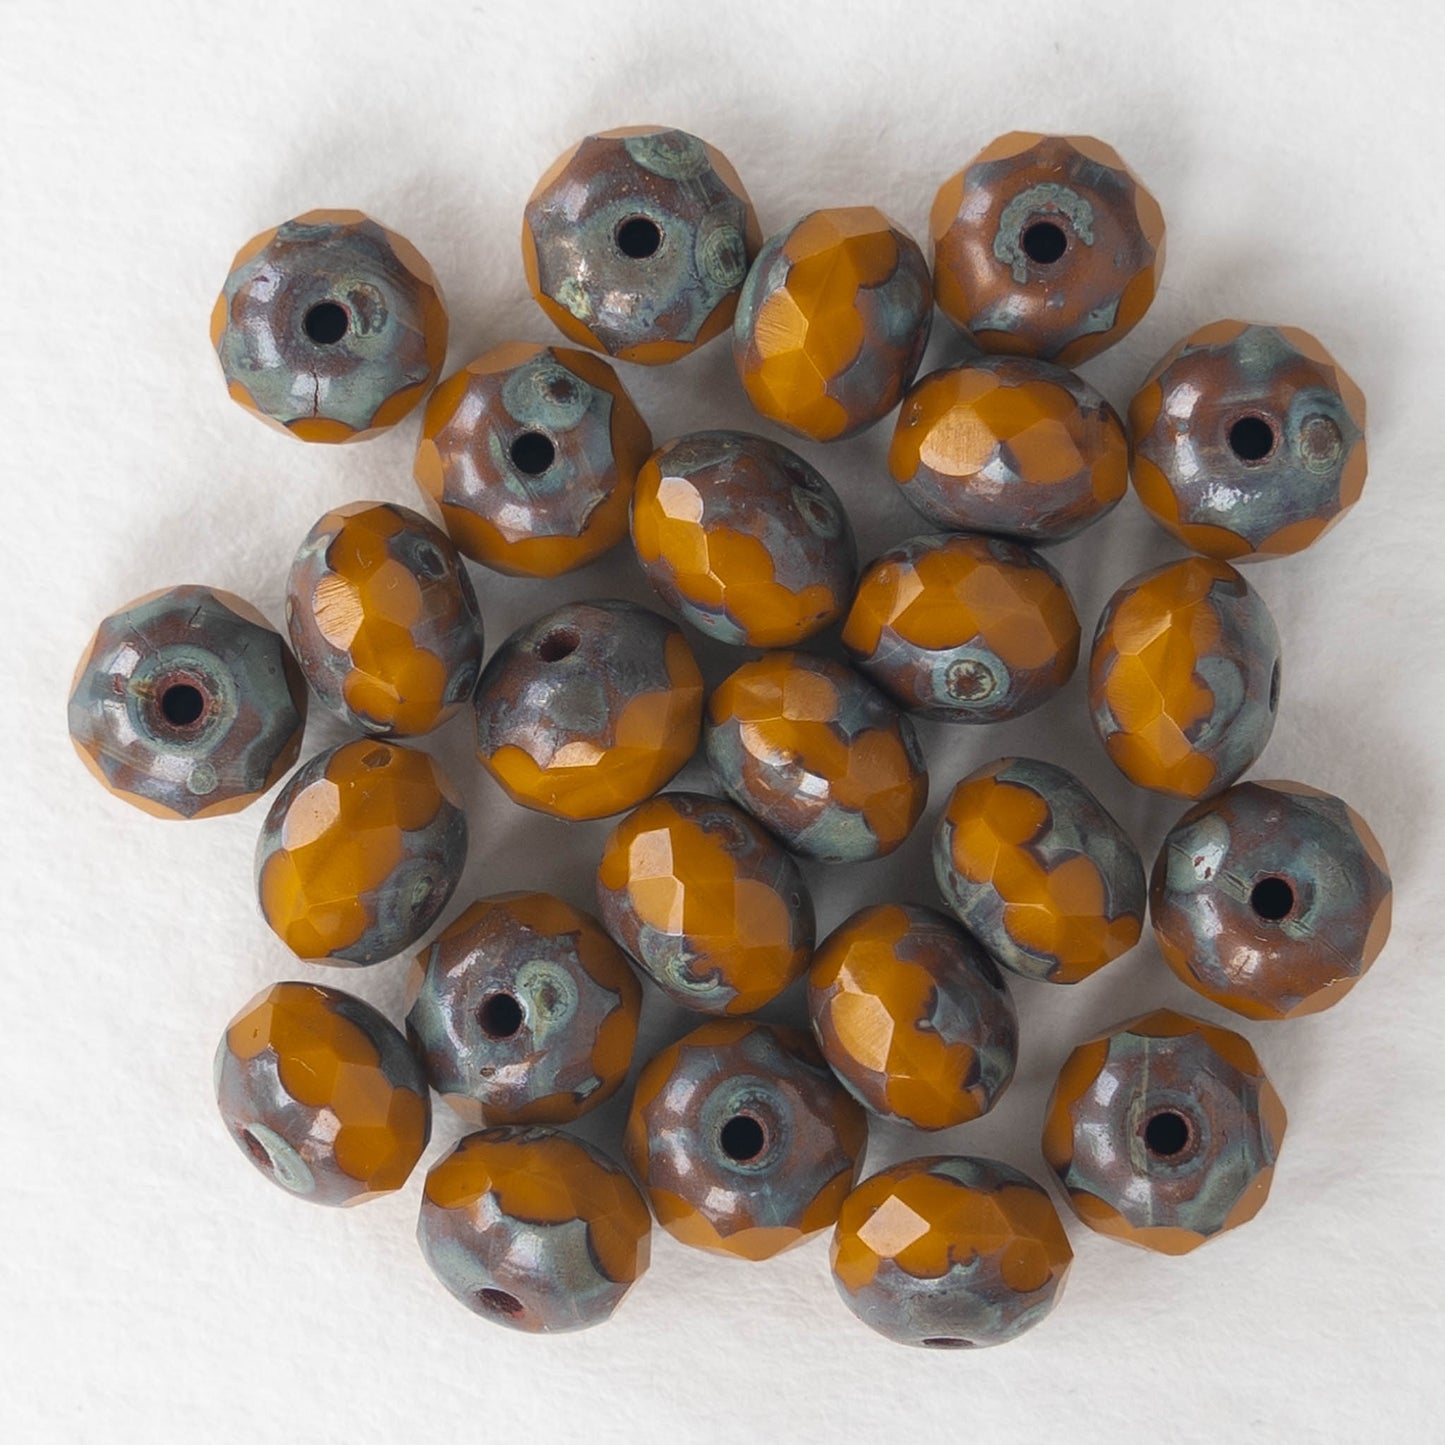 5x7mm Rondelle Beads - Ochre Picasso - 25 beads